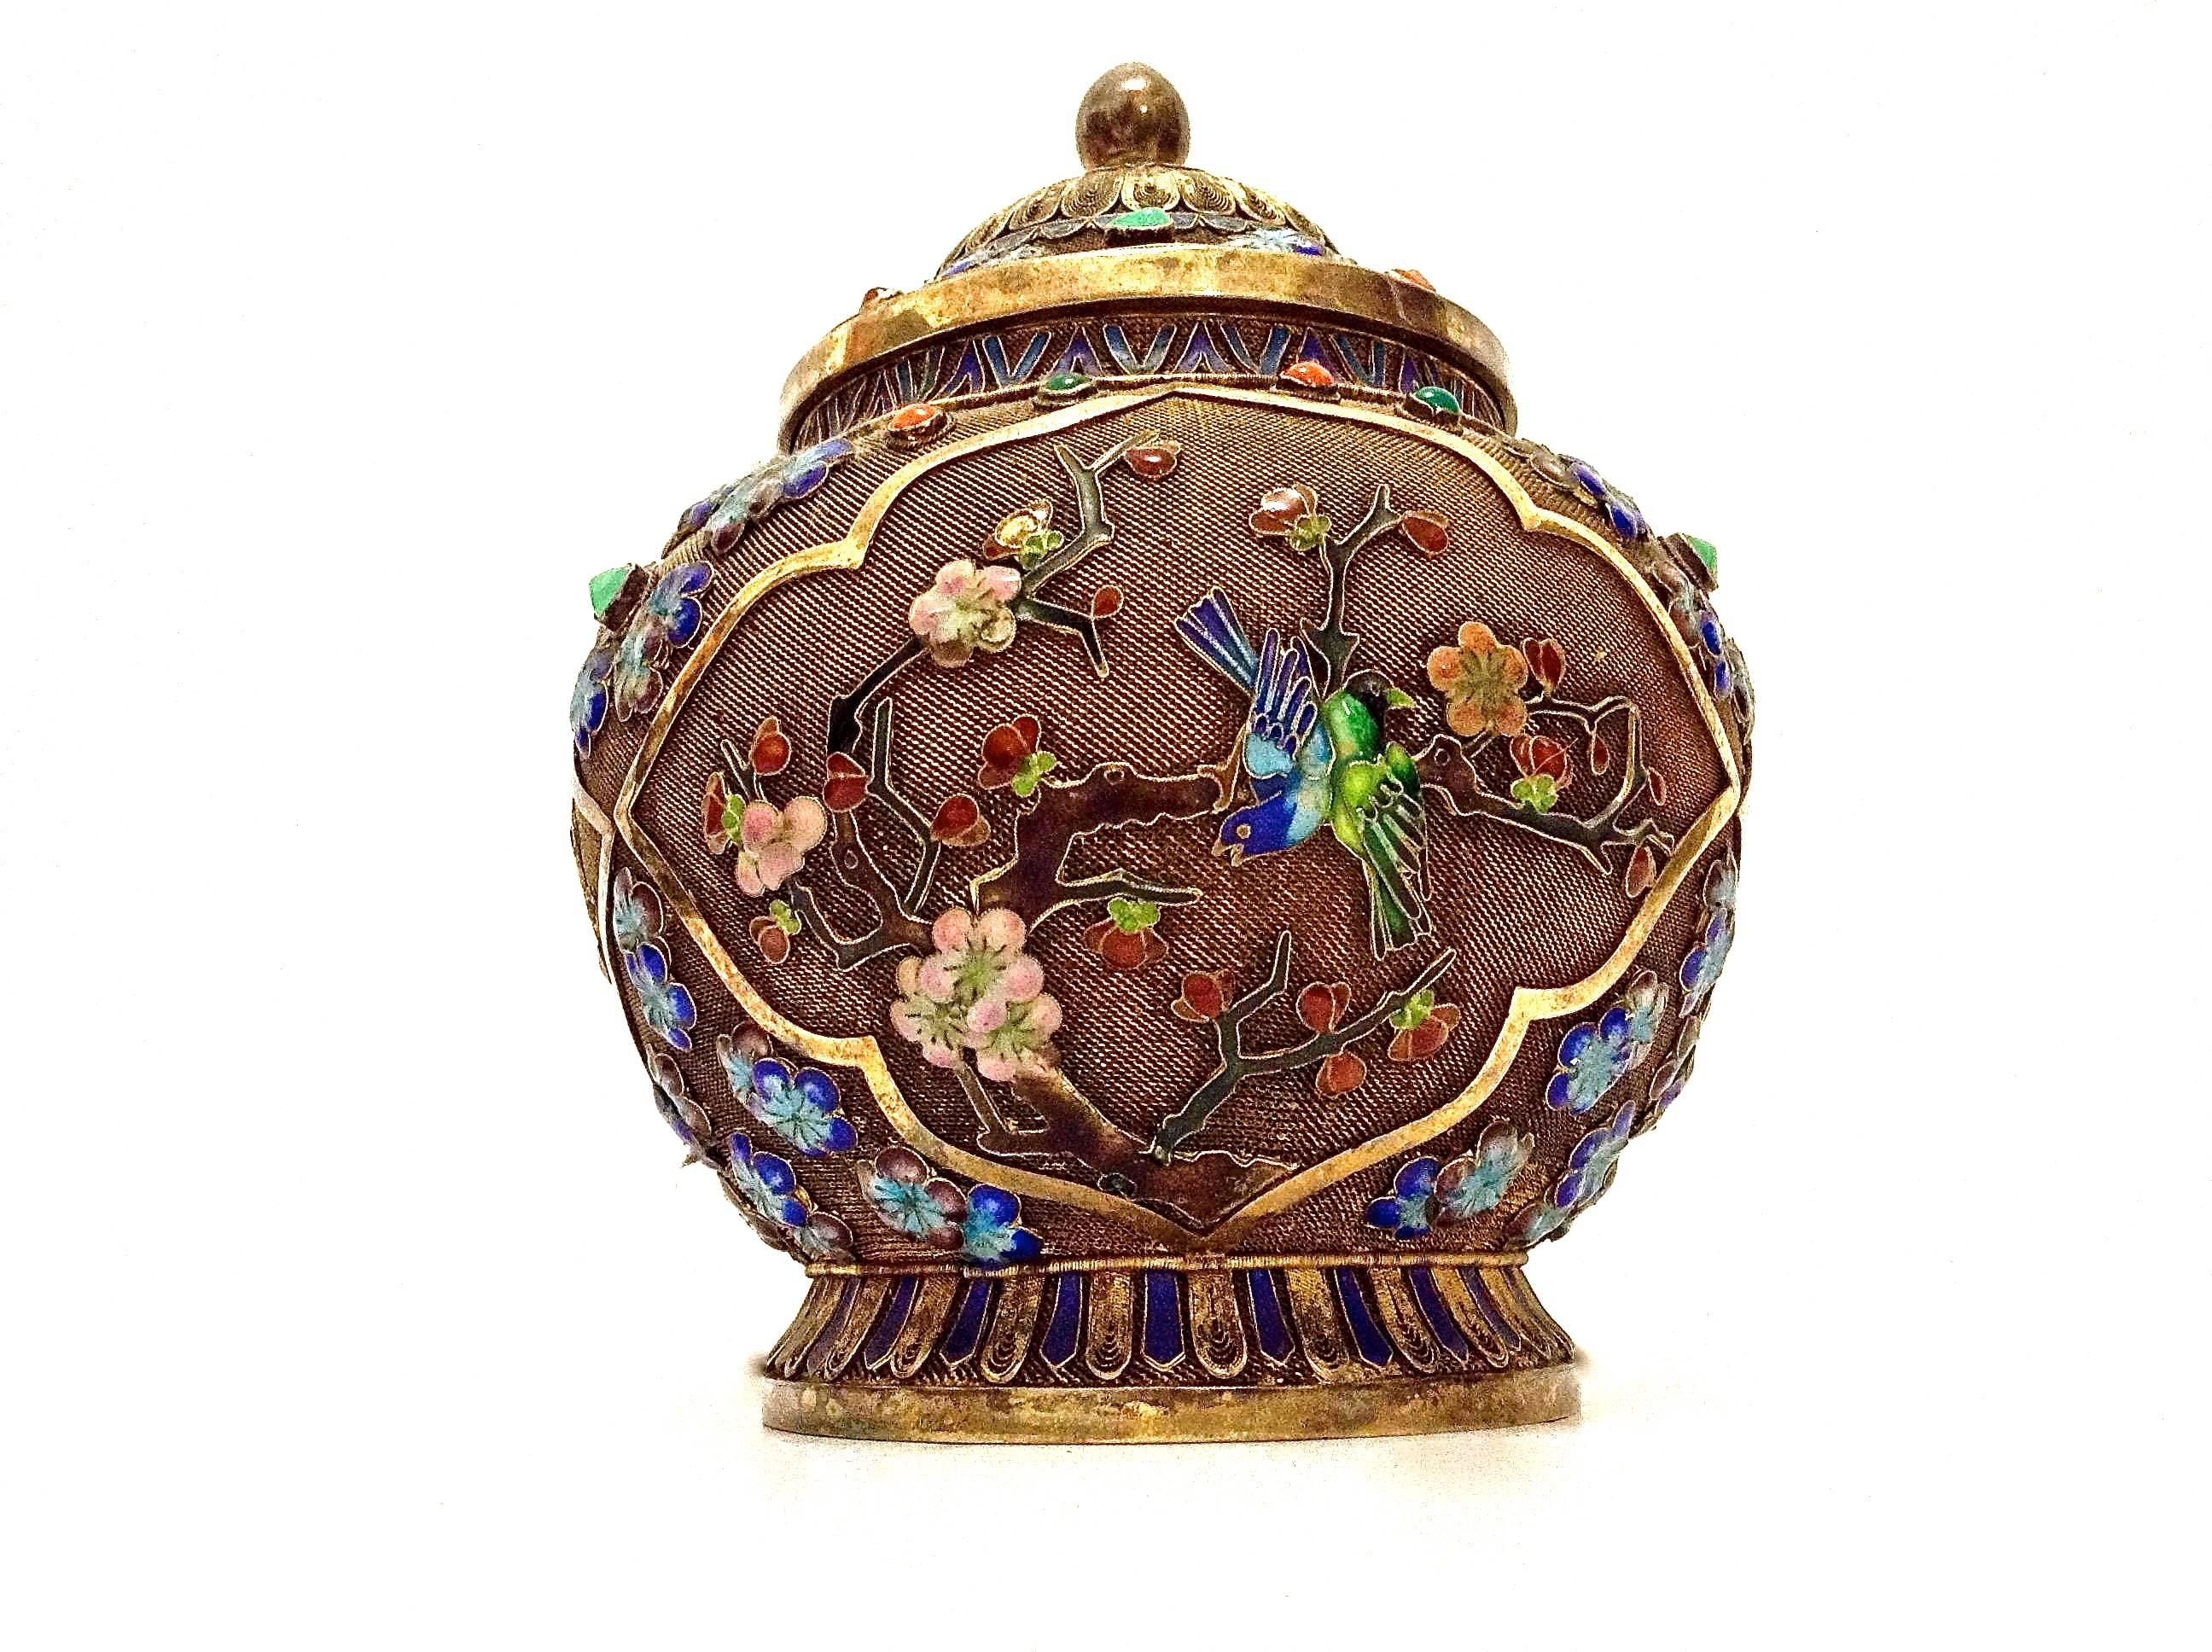 A late 19th century Chinese export silver-gilt and enamel box featuring flowers, birds and butterflies. The box has a blue heart shaped radial design on the lid next to the finial and filigree and mesh metalwork all-over. It is of a bulbous shape